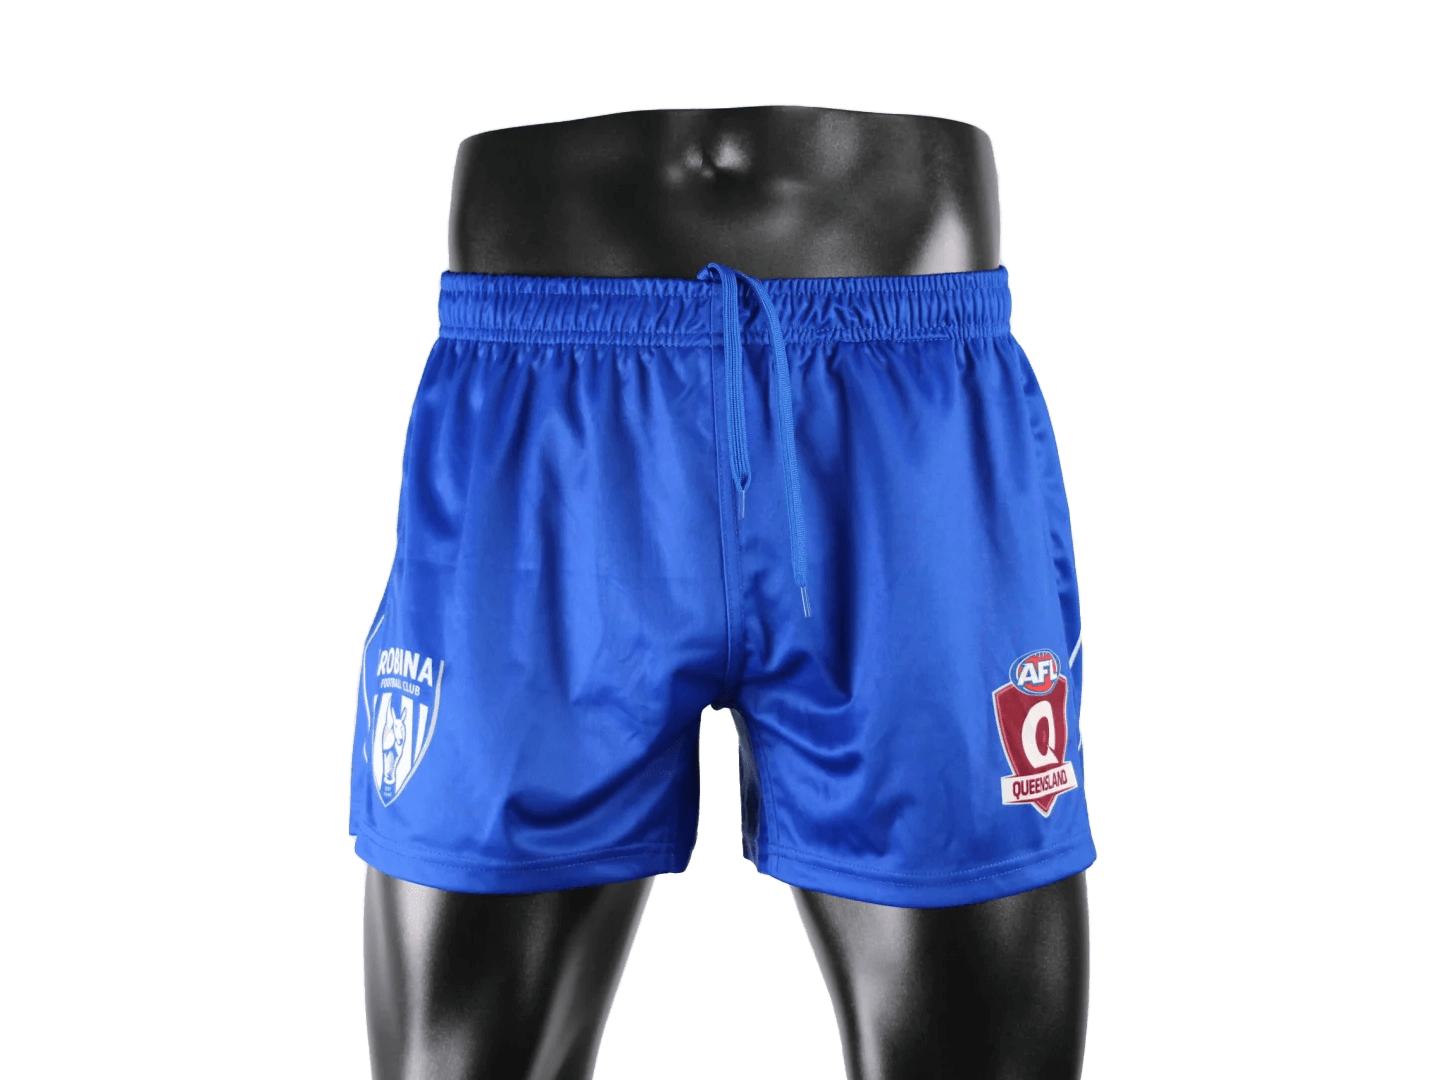 aussie footy shorts with pockets